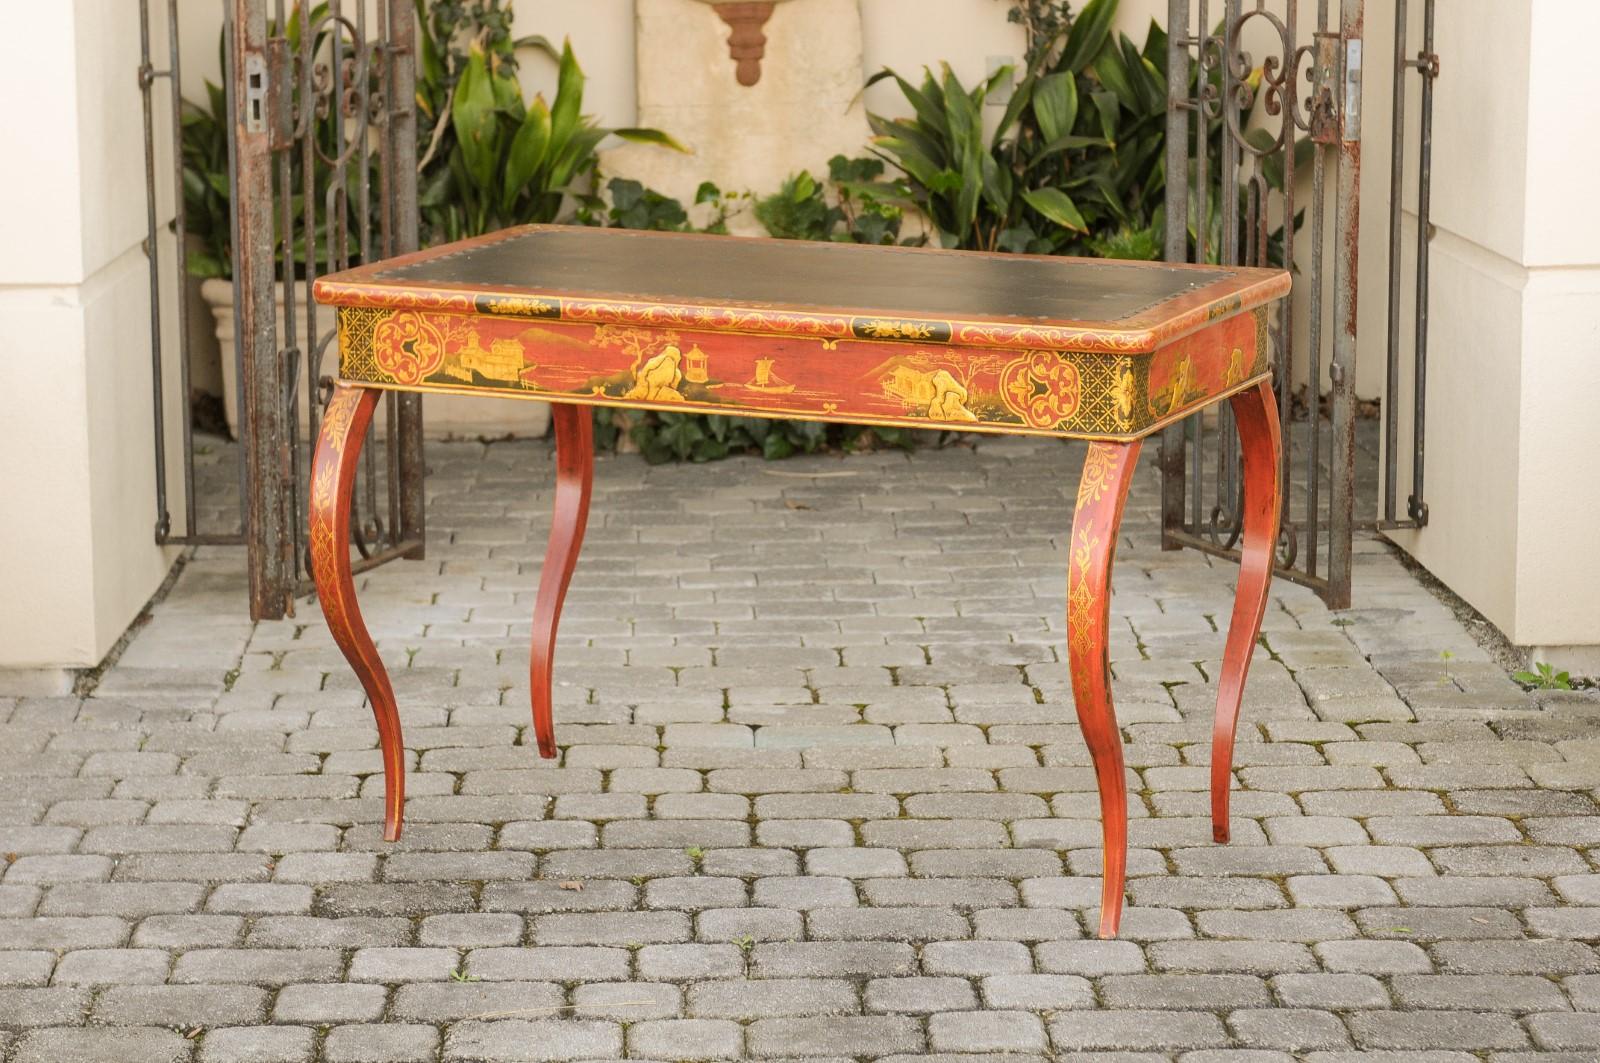 An English Regency period writing table from the early 19th century, with red lacquered, black and gilt chinoiserie decor and cabriole legs. Born in England during the early Regency era, this exquisite writing table captures the refined elegance and